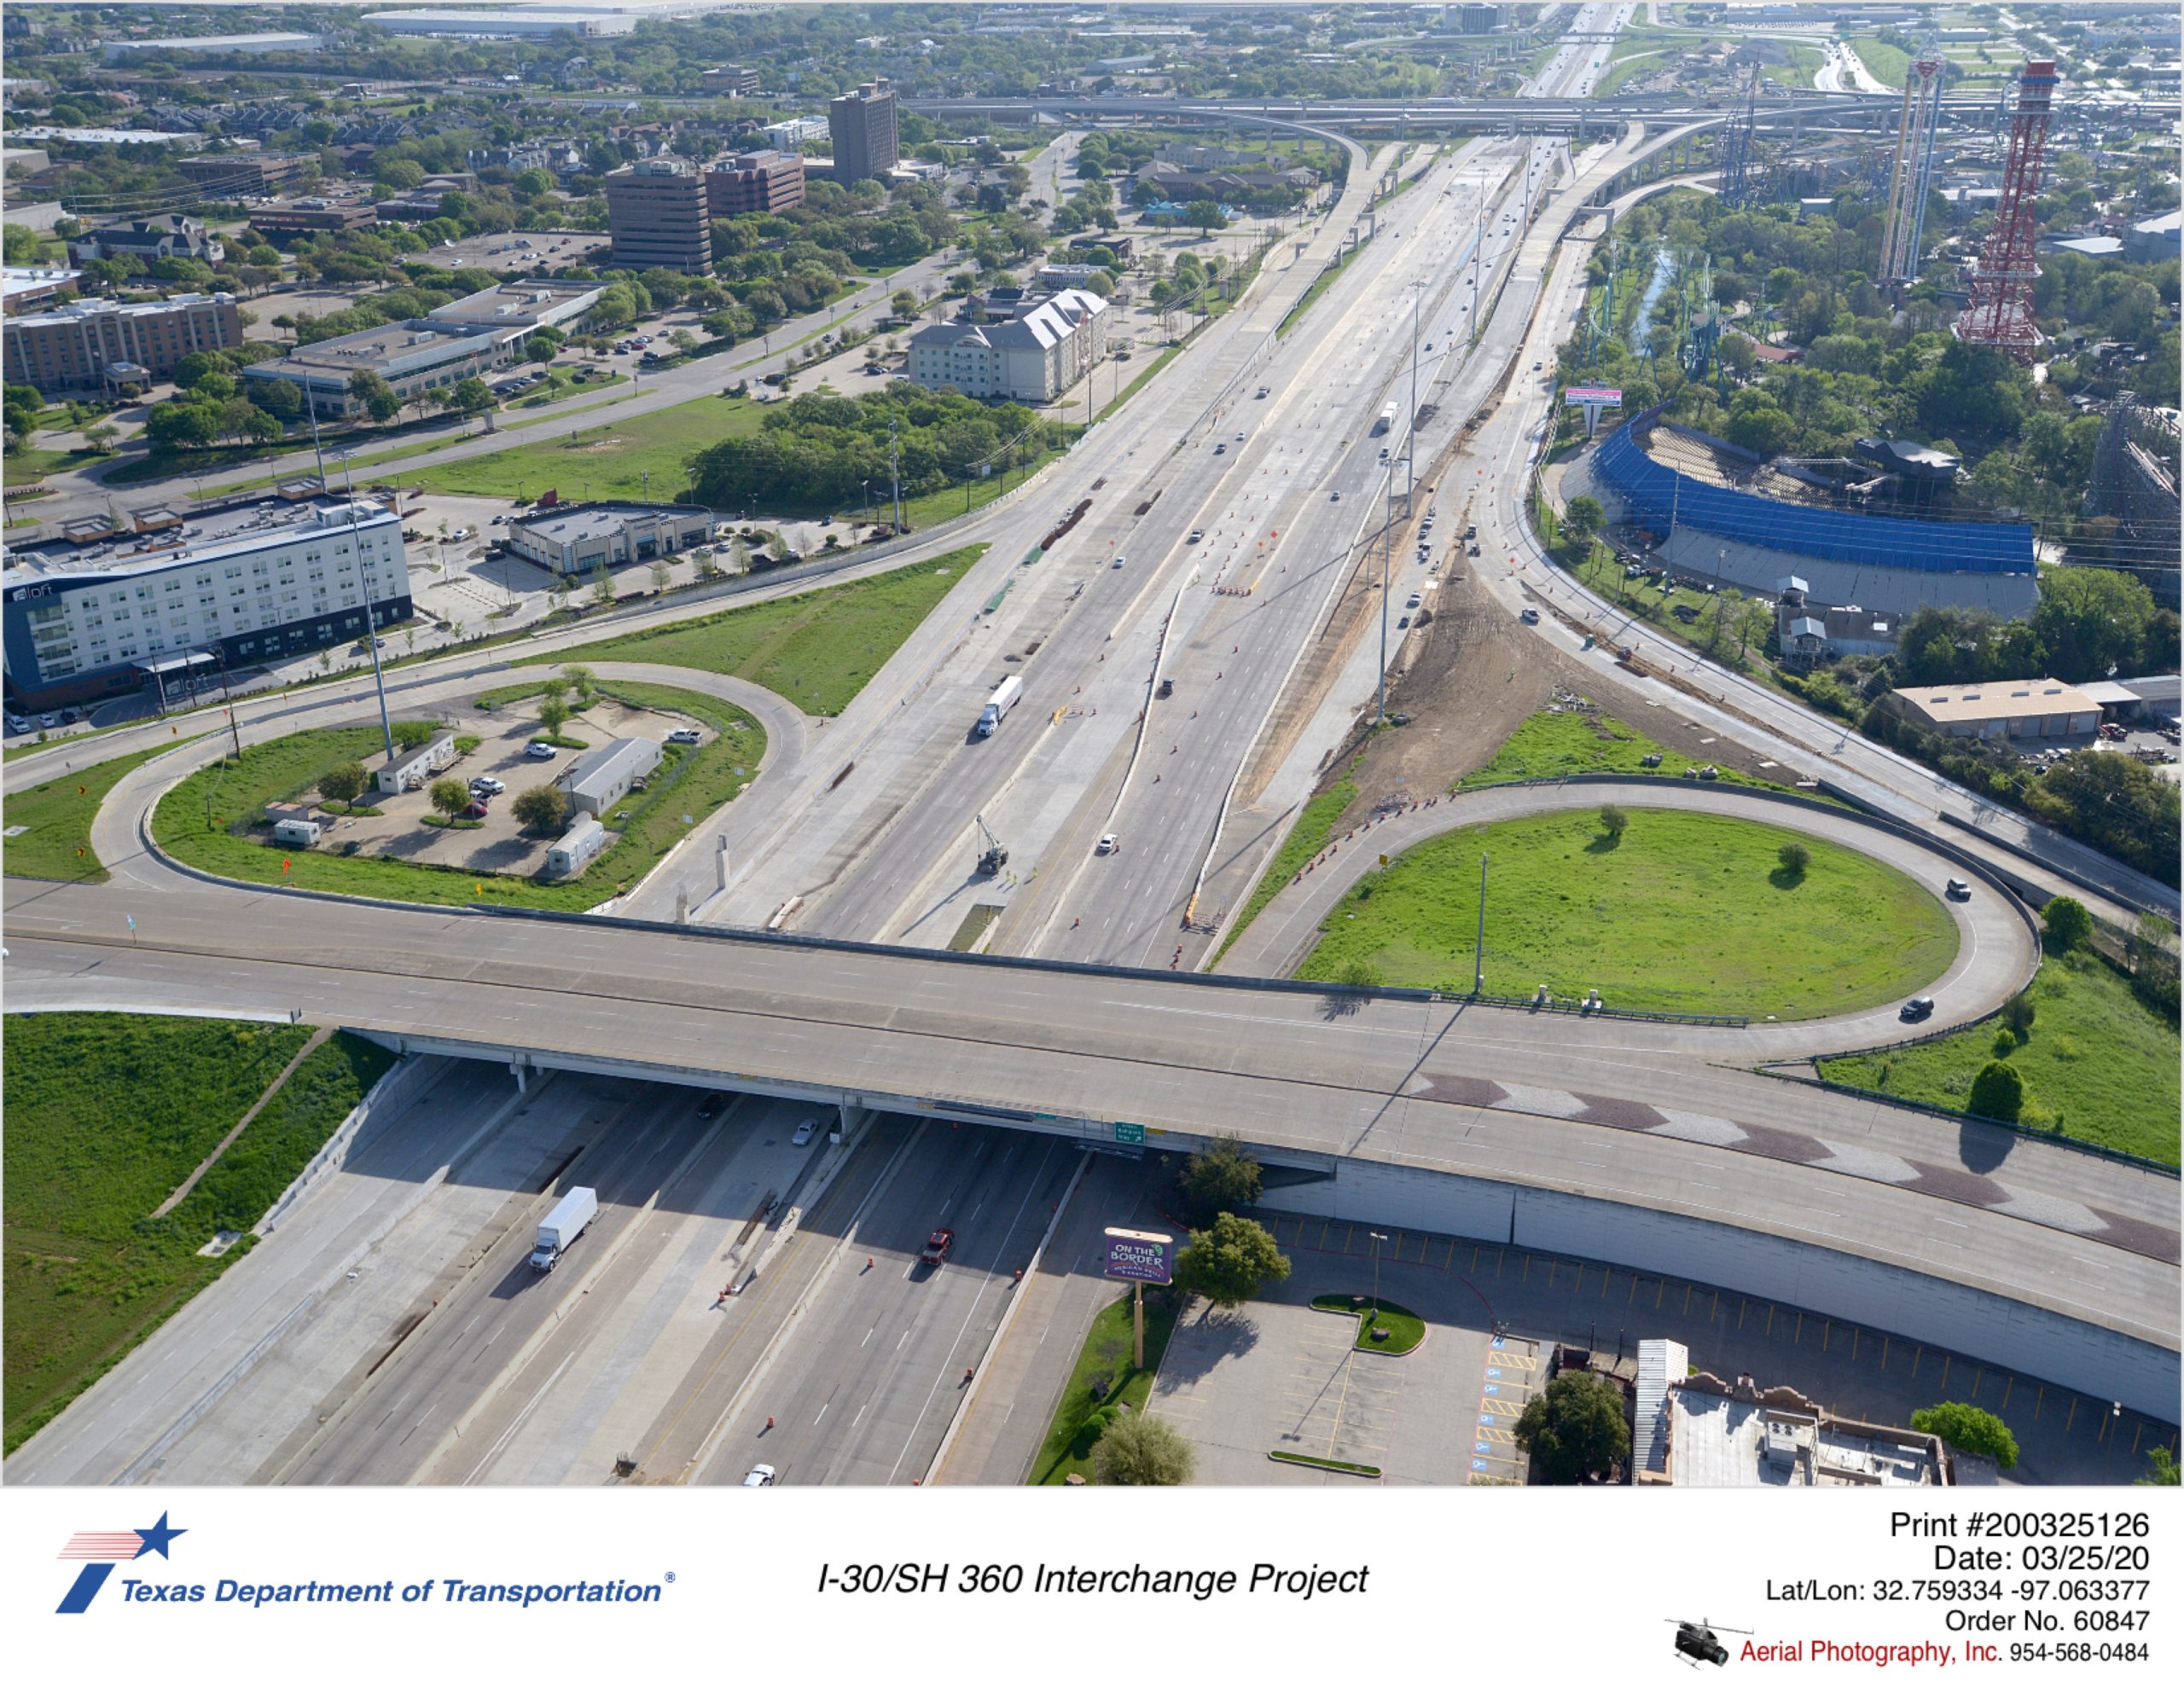 I-30 looking east over Ballpark Way interchange. Construction for new eastbound Copeland Rd exit and northbound ramp from Ballpark Way is shown.